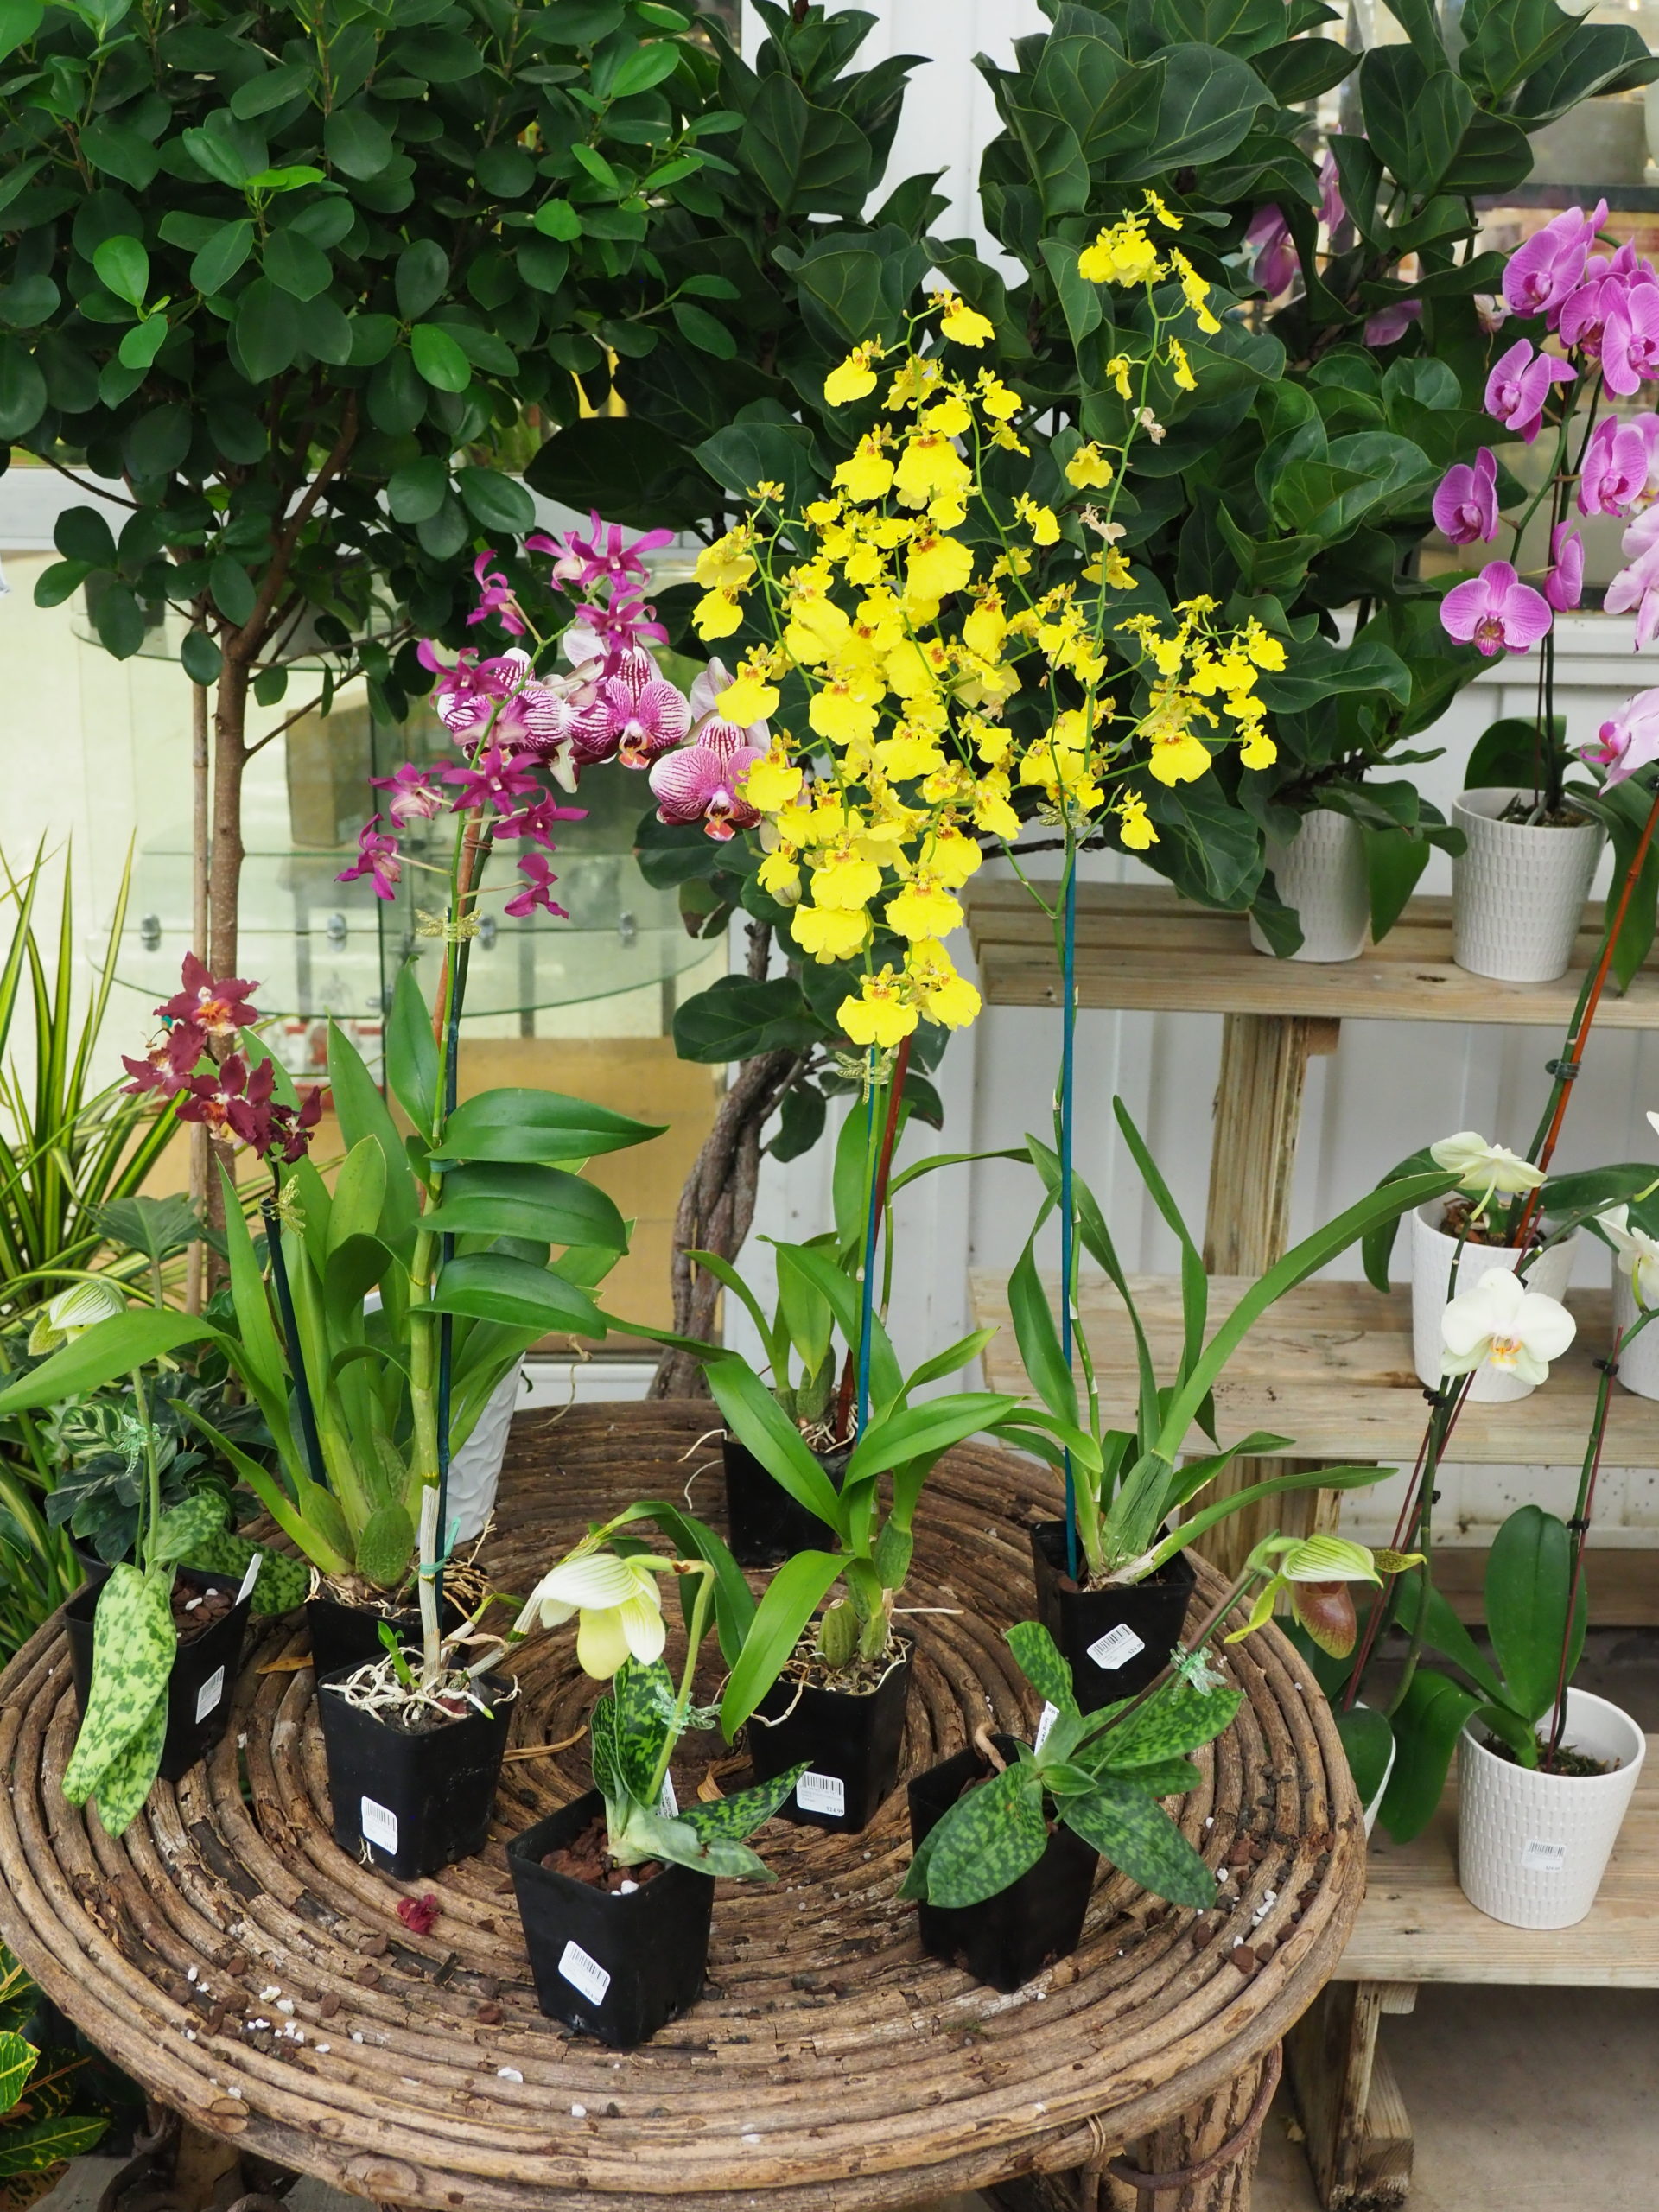 Once considered a plant for only accomplished gardeners, orchids are now so inexpensive that they are nearly disposable. Getting them to rebloom is the challenge, but when they do, there’s an incredible sense of accomplishment. Some are very easy, others, much harder. Flowers often last for weeks to months.